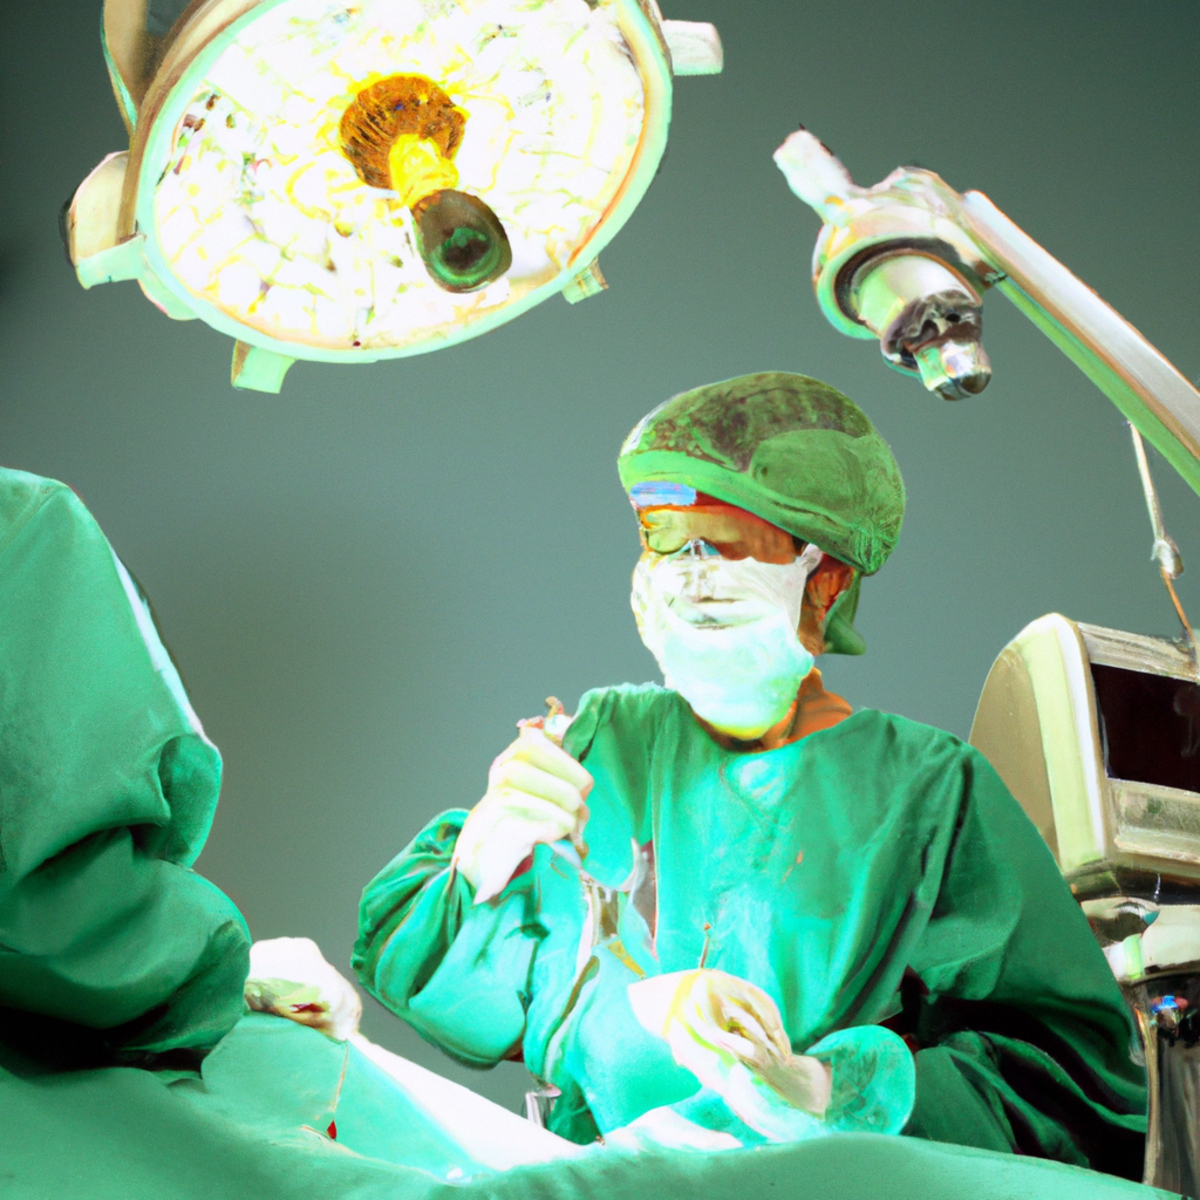 A surgical theater with a laparoscope, tools, and a Gallbladder Volvulusmodel, inviting readers to explore a medical article.